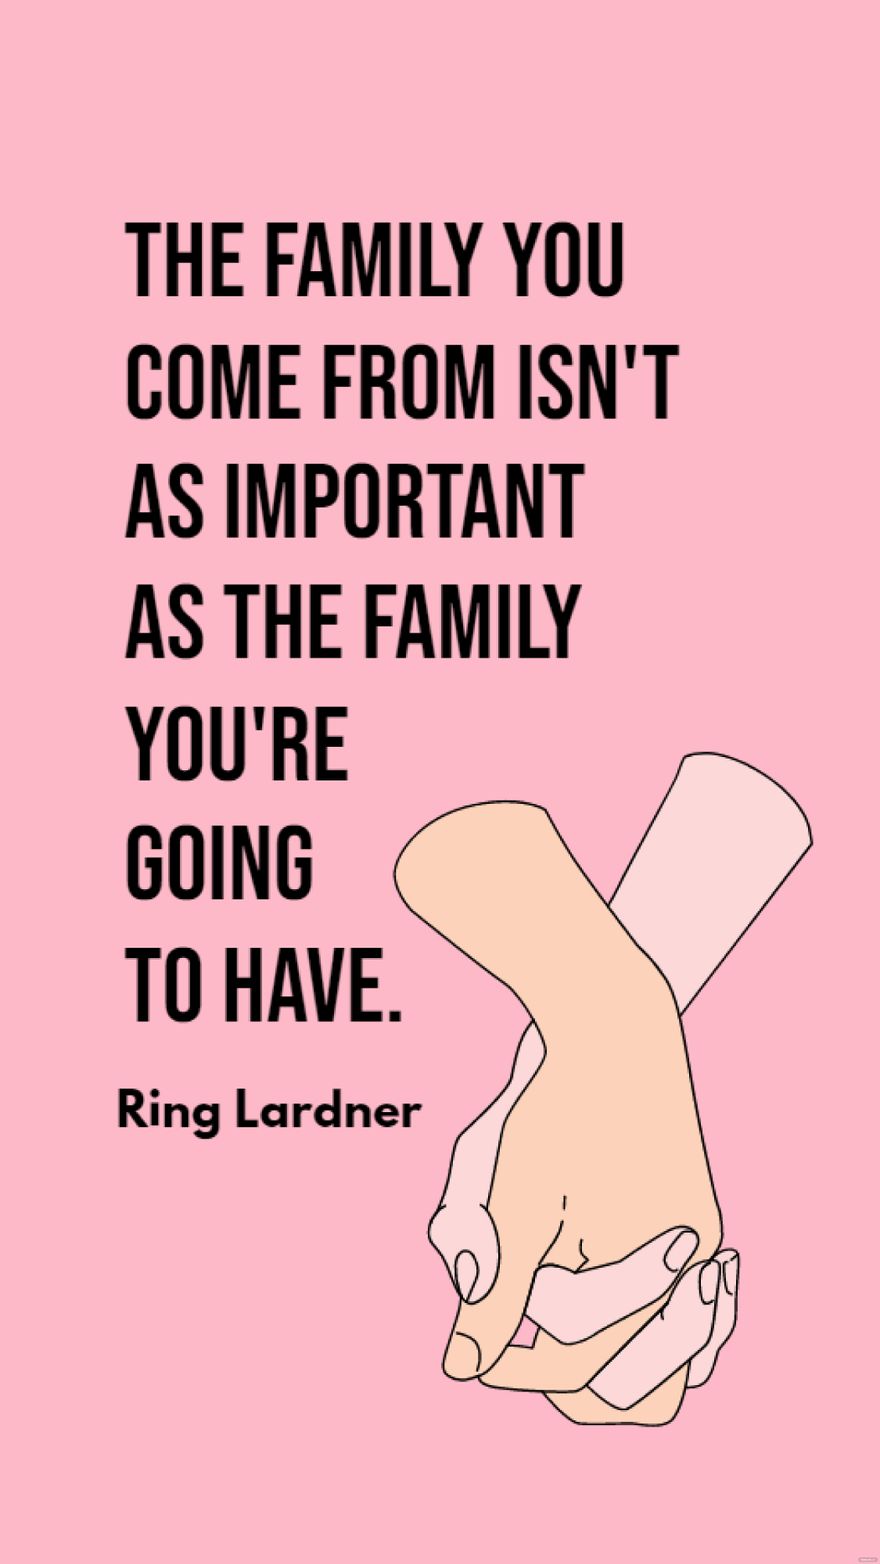 Free Ring Lardner - The family you come from isn't as important as the family you're going to have. in JPG